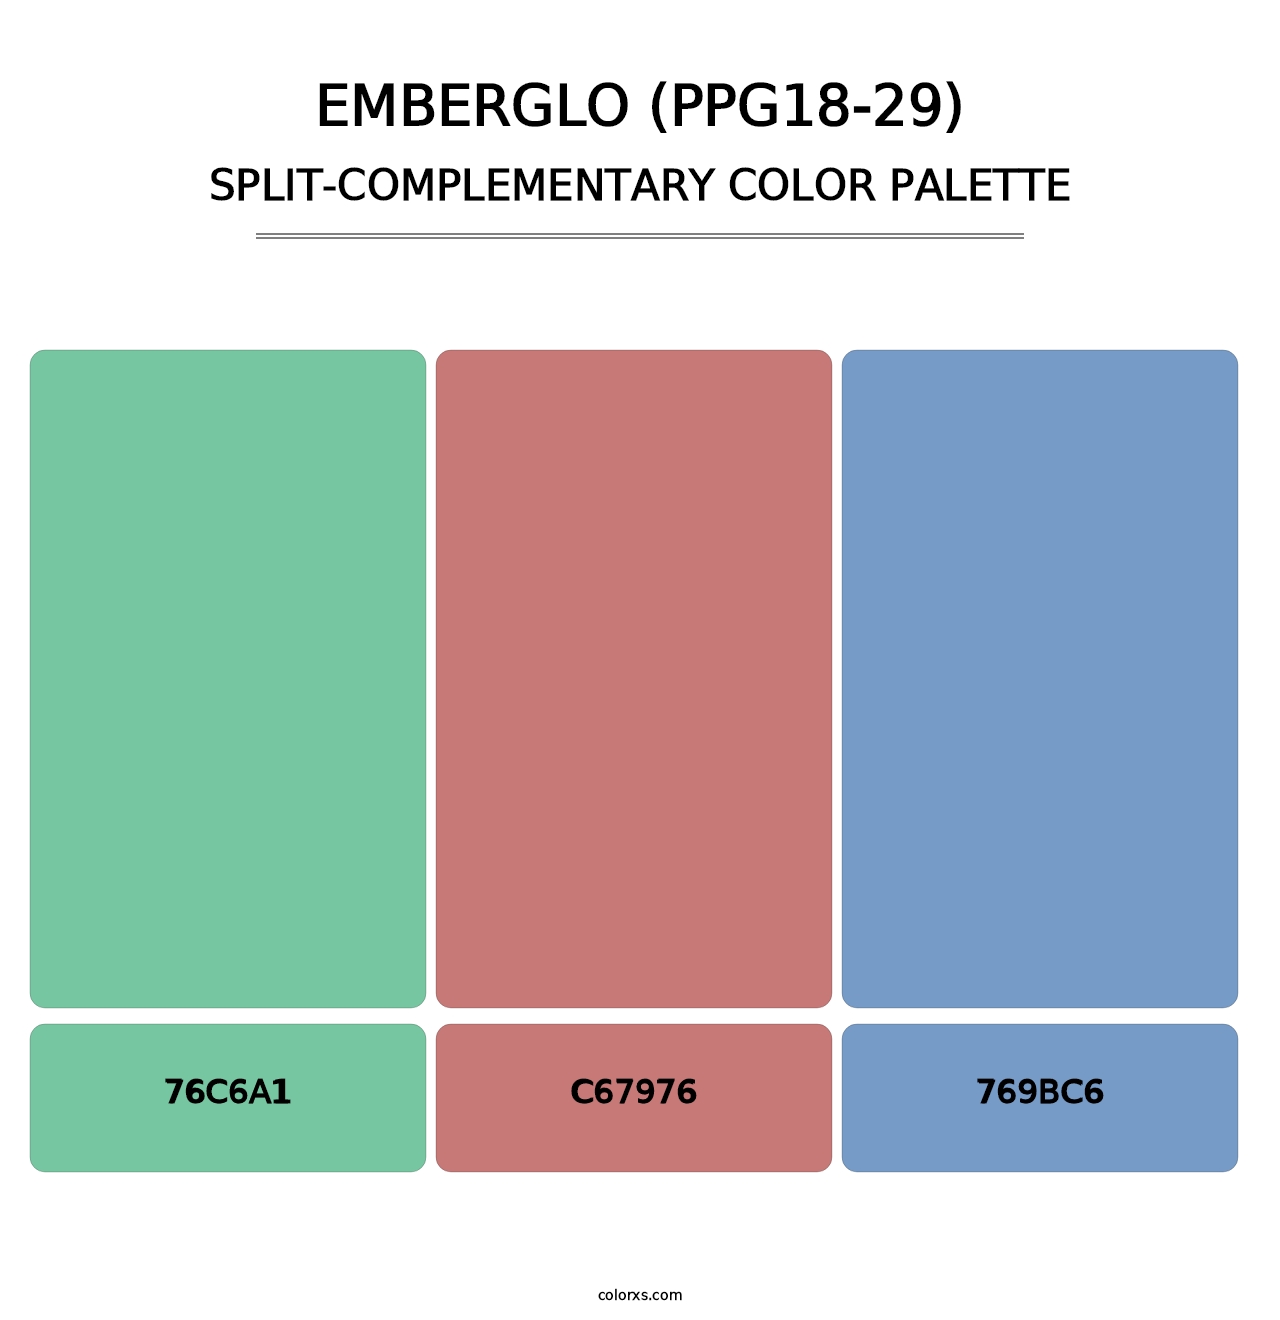 Emberglo (PPG18-29) - Split-Complementary Color Palette